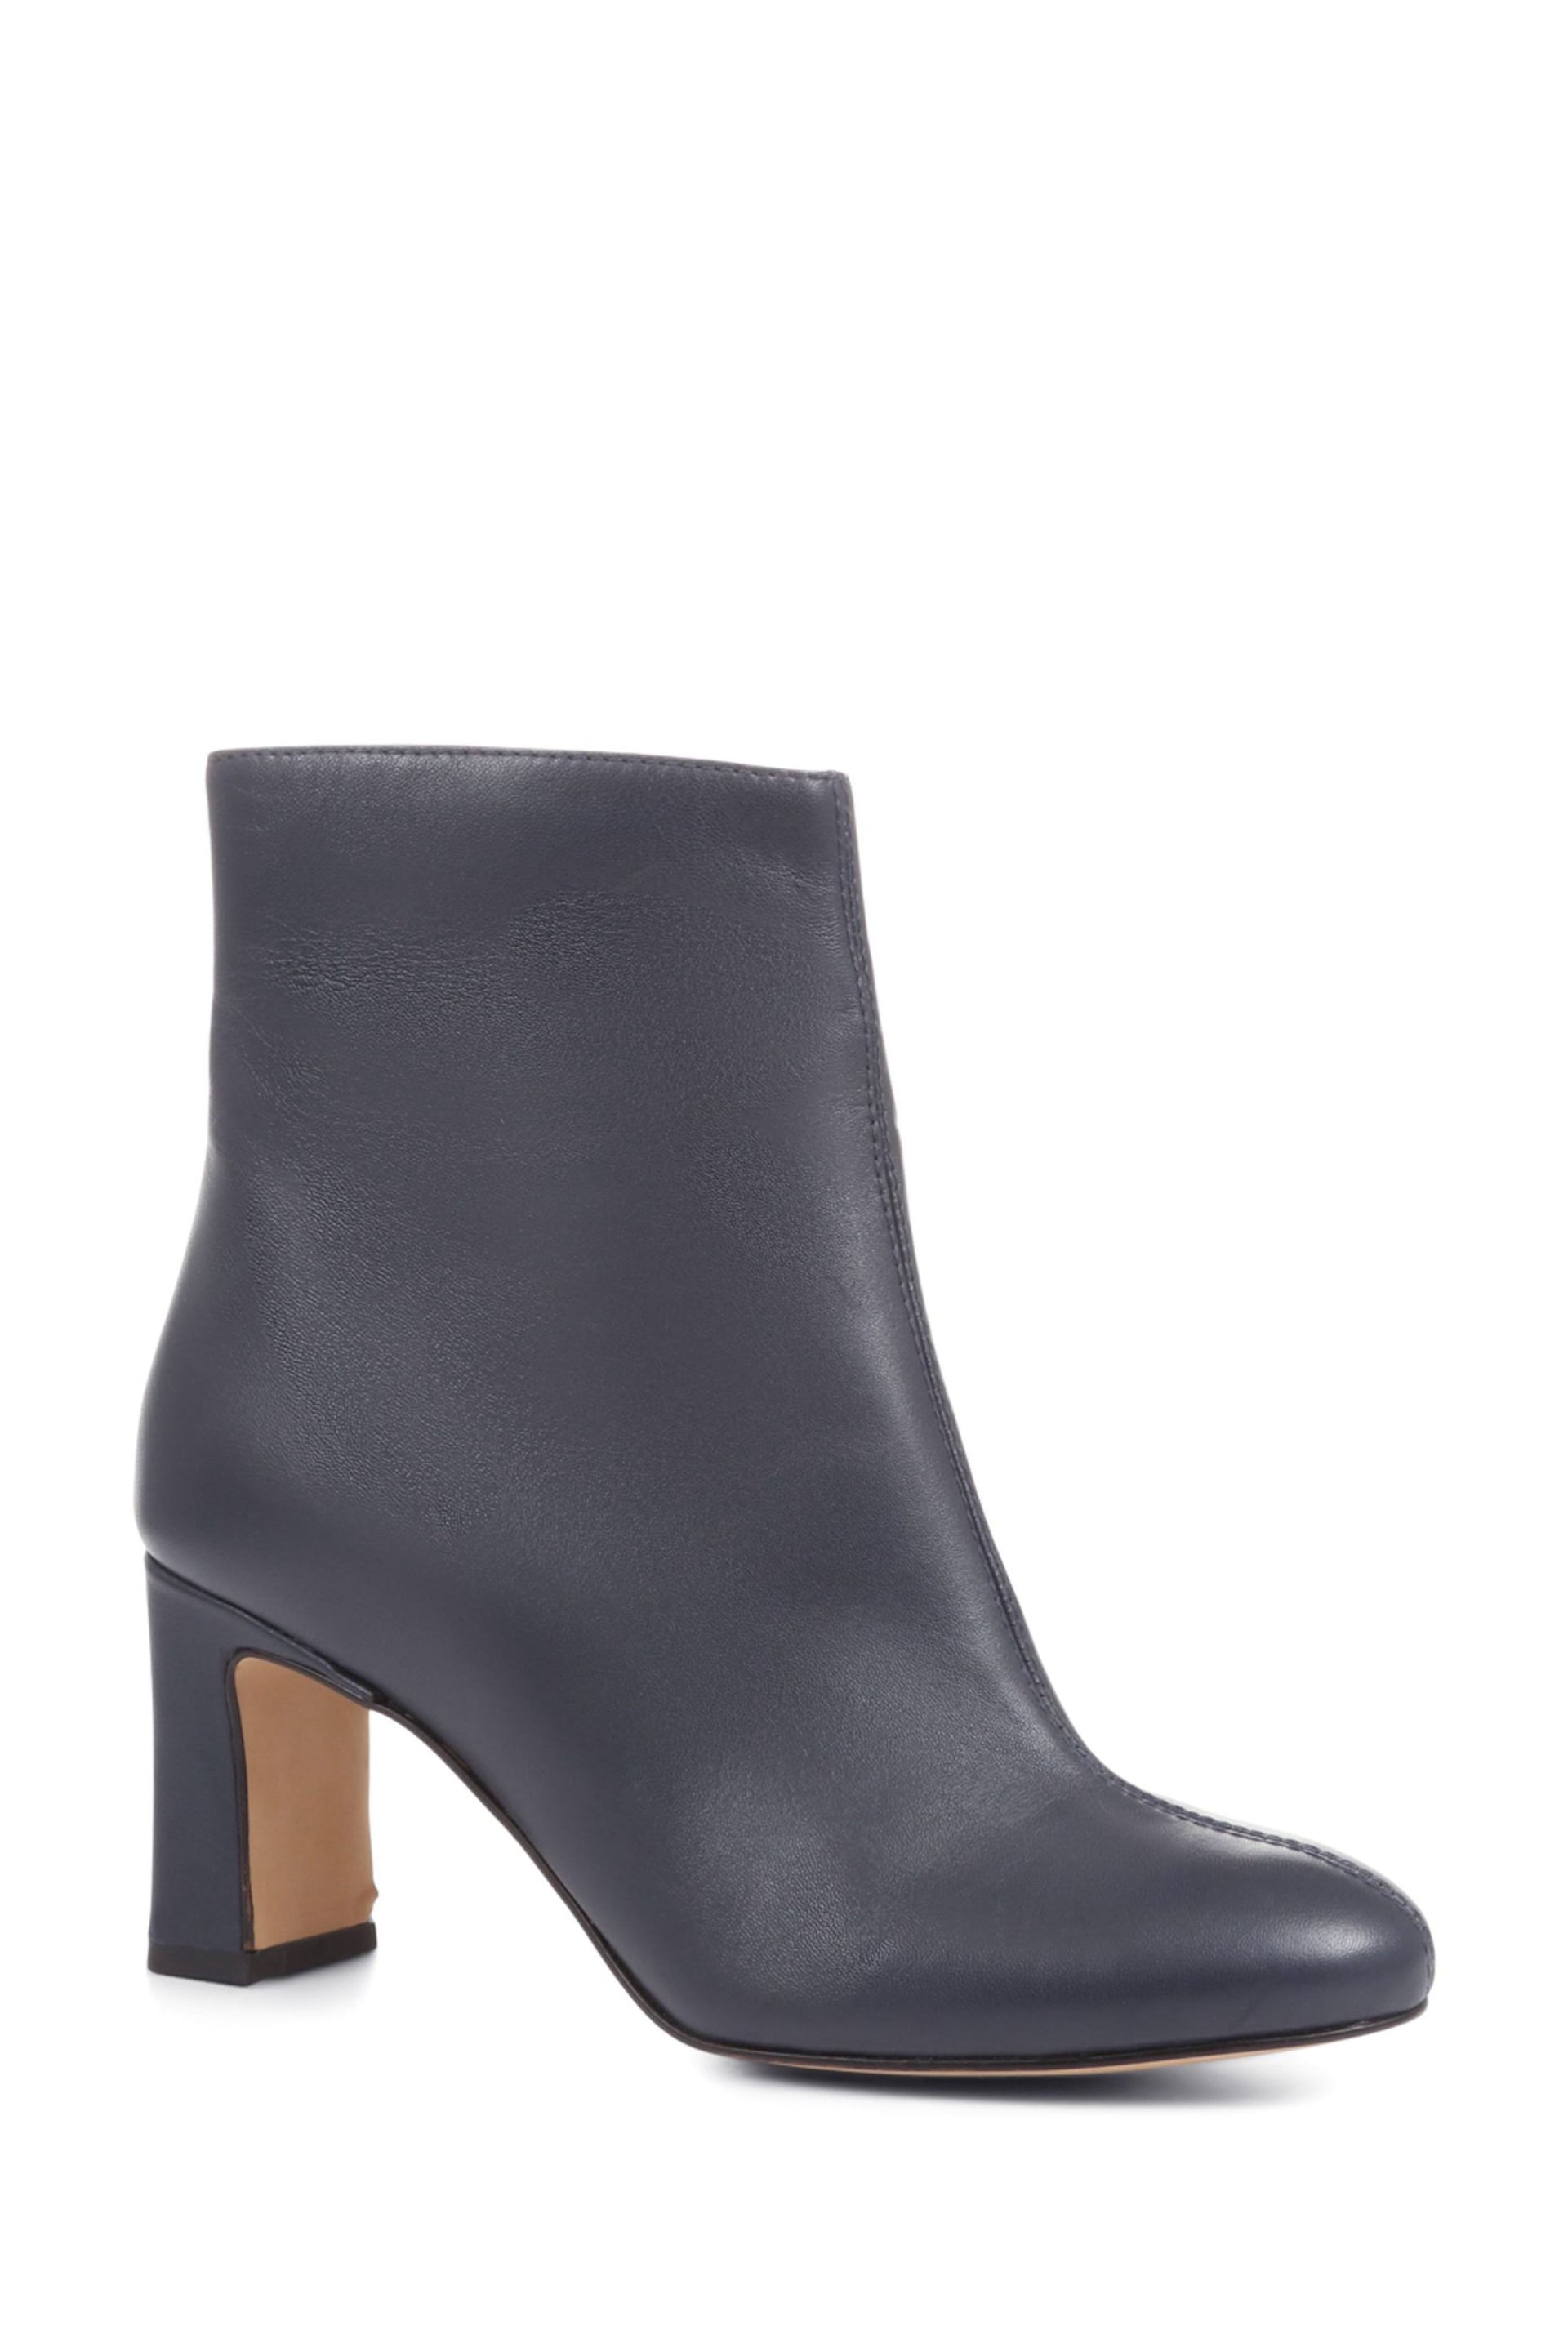 Jones Bootmaker Blue Letty Heeled Leather Ankle Boots - Image 3 of 6